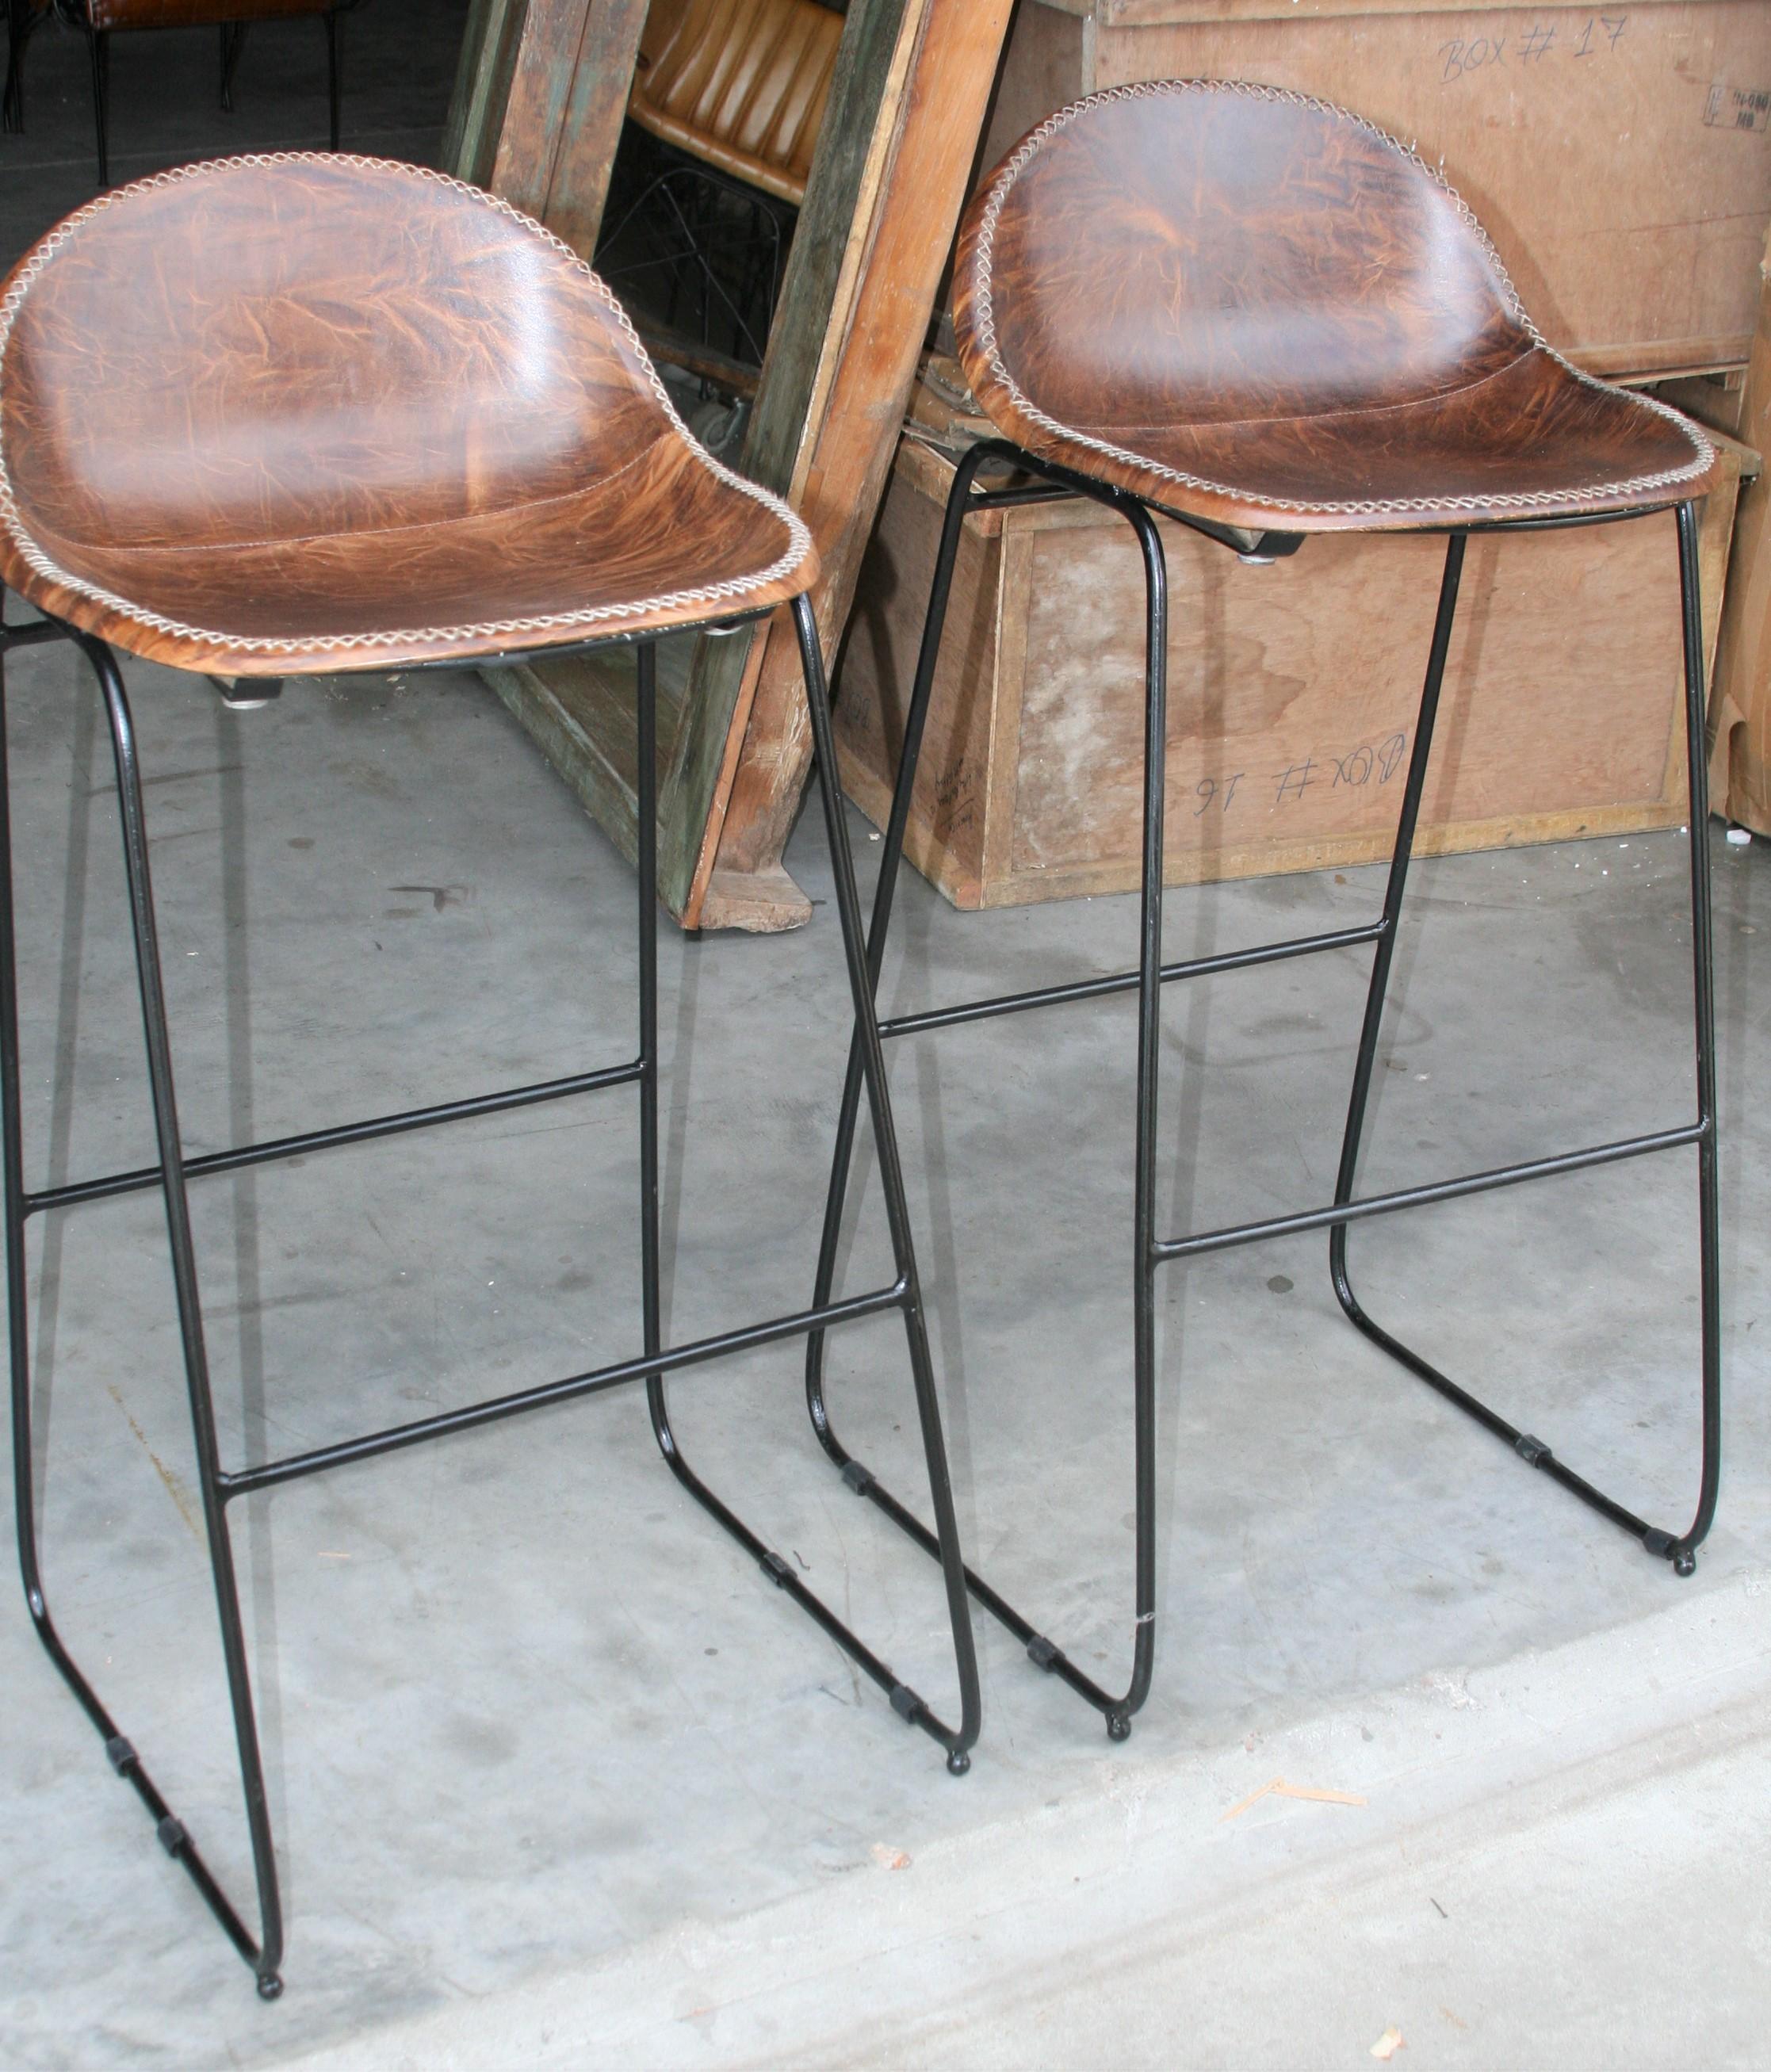 The first thing people will notice is the quality pf this bar stool. The leather is handstitched and the iron work is hand forged. It will last generations. The price is the lowest for bar stools like this. It is the product of the leather design